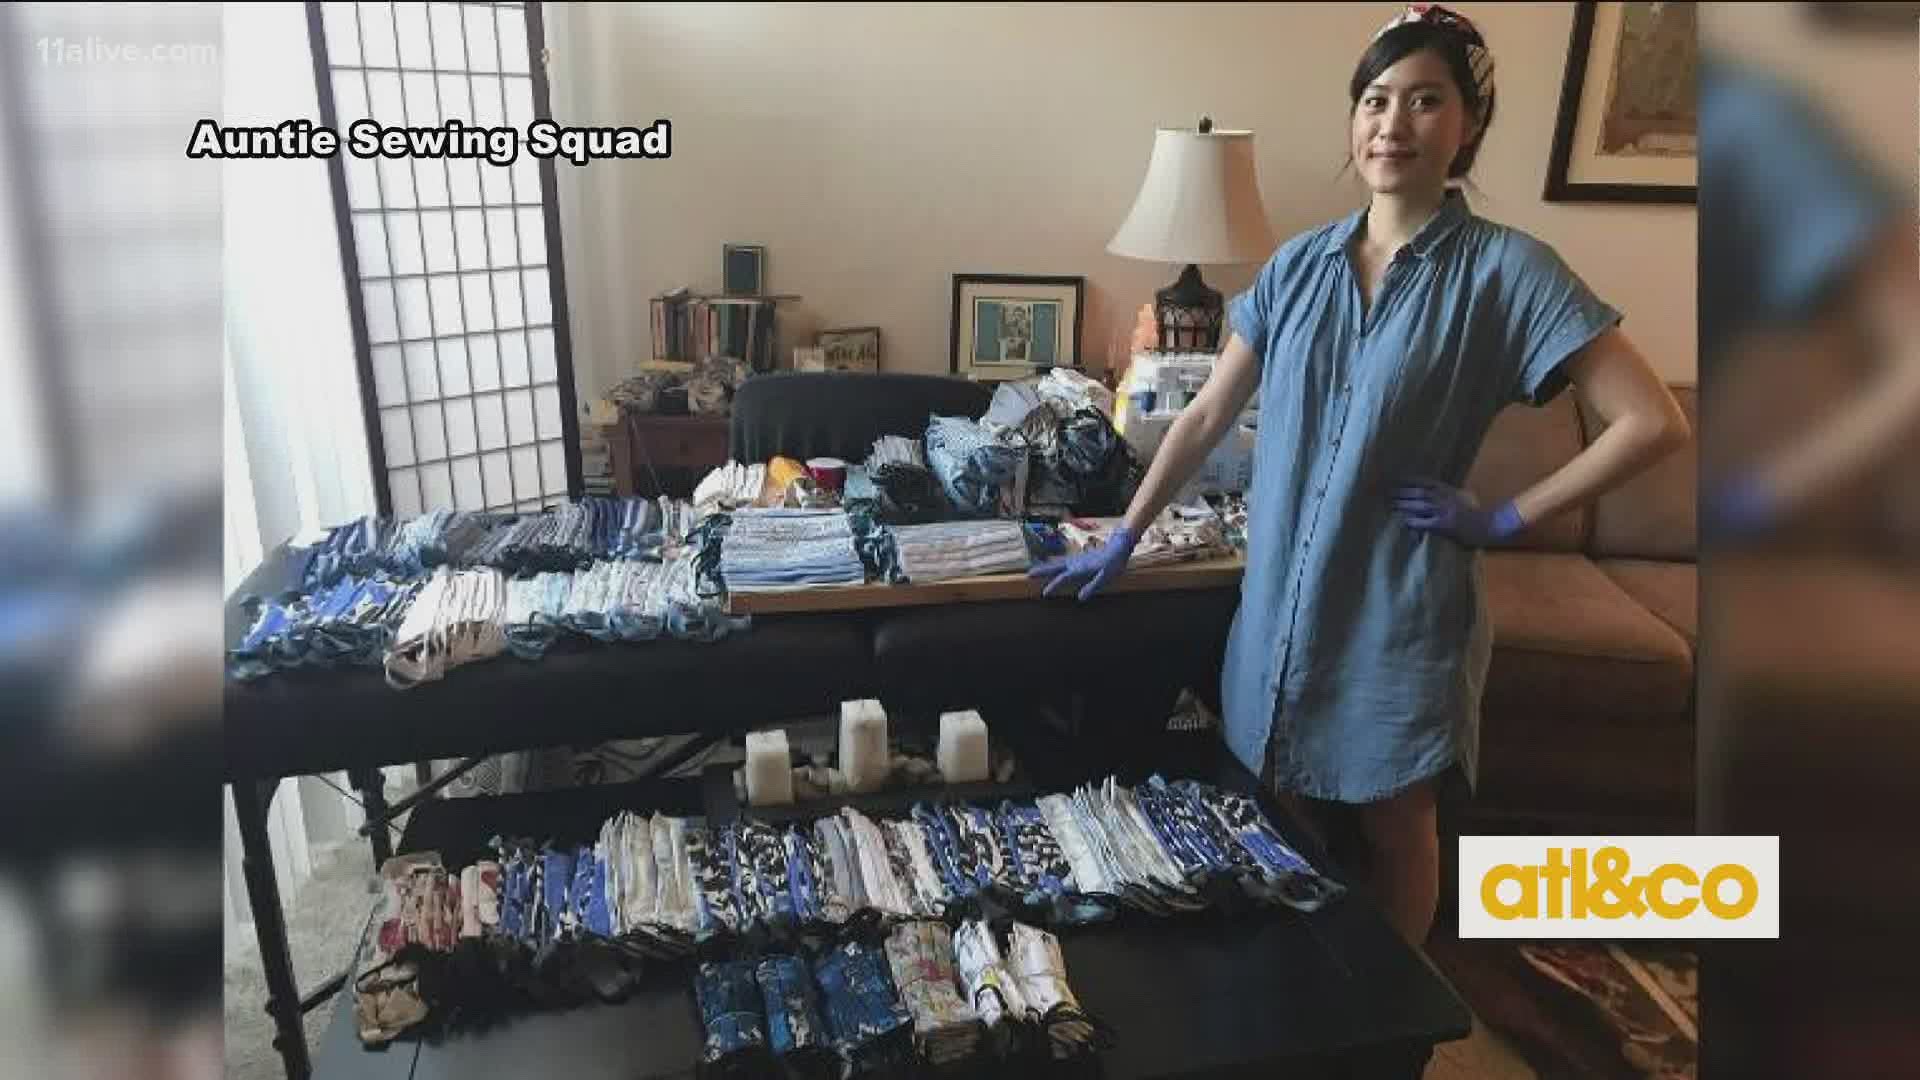 Over 800 members of the "Auntie Sewing Squad" churn out masks and mail them nationwide! Cara Kneer shares heartwarming stories with Christine Pullara on A&C.